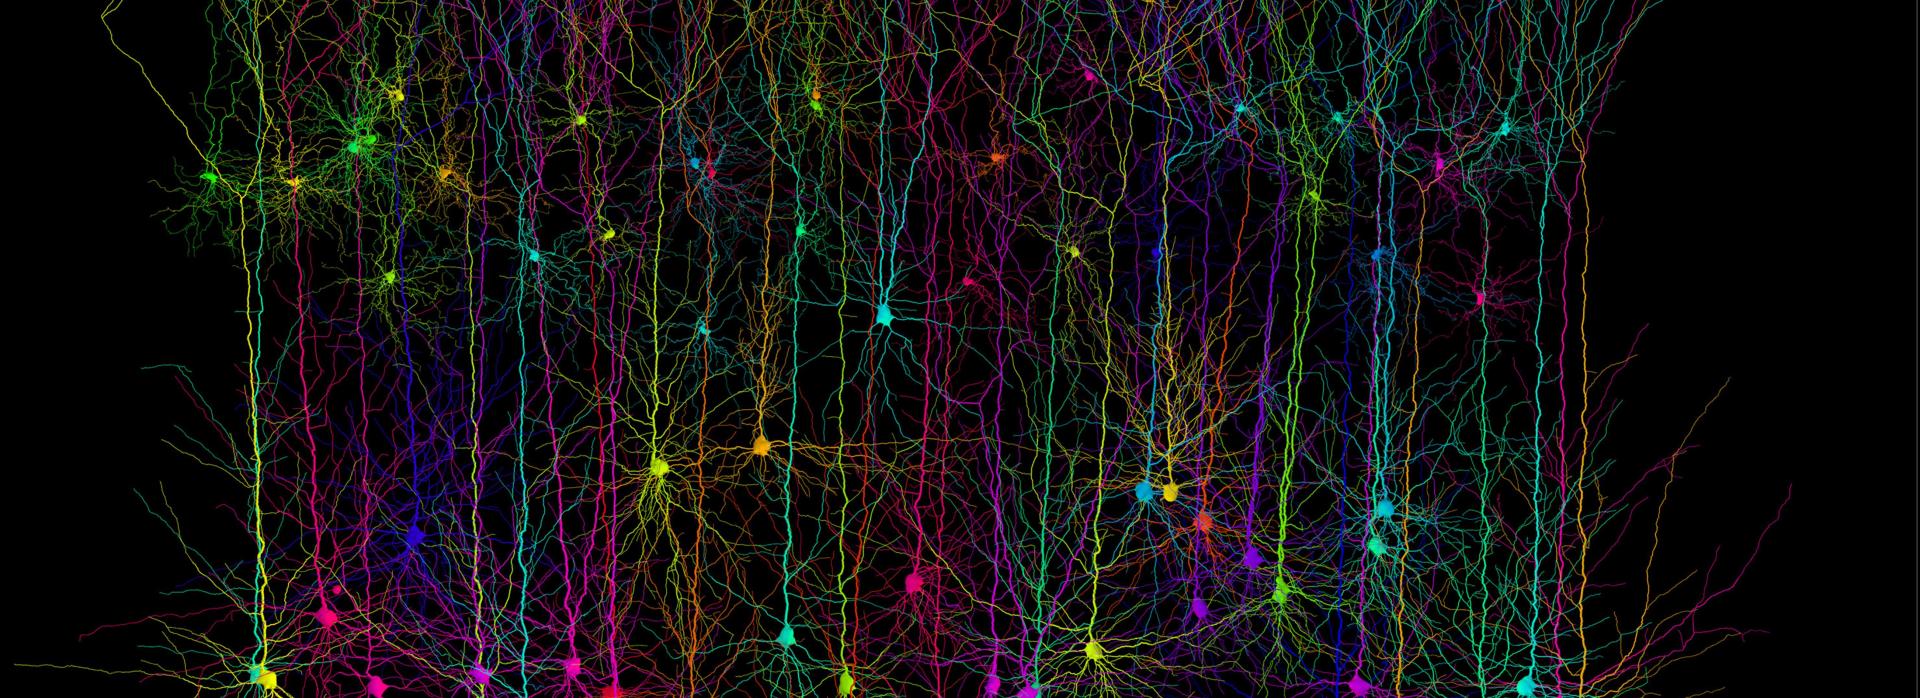 Computer simulated pyramidal neurons. Credit- Dr Hermann Cuntz & Prof. Michael Häusser, UCL. Attribution-NonCommercial 4.0 International (CC BY-NC 4.0).jpg